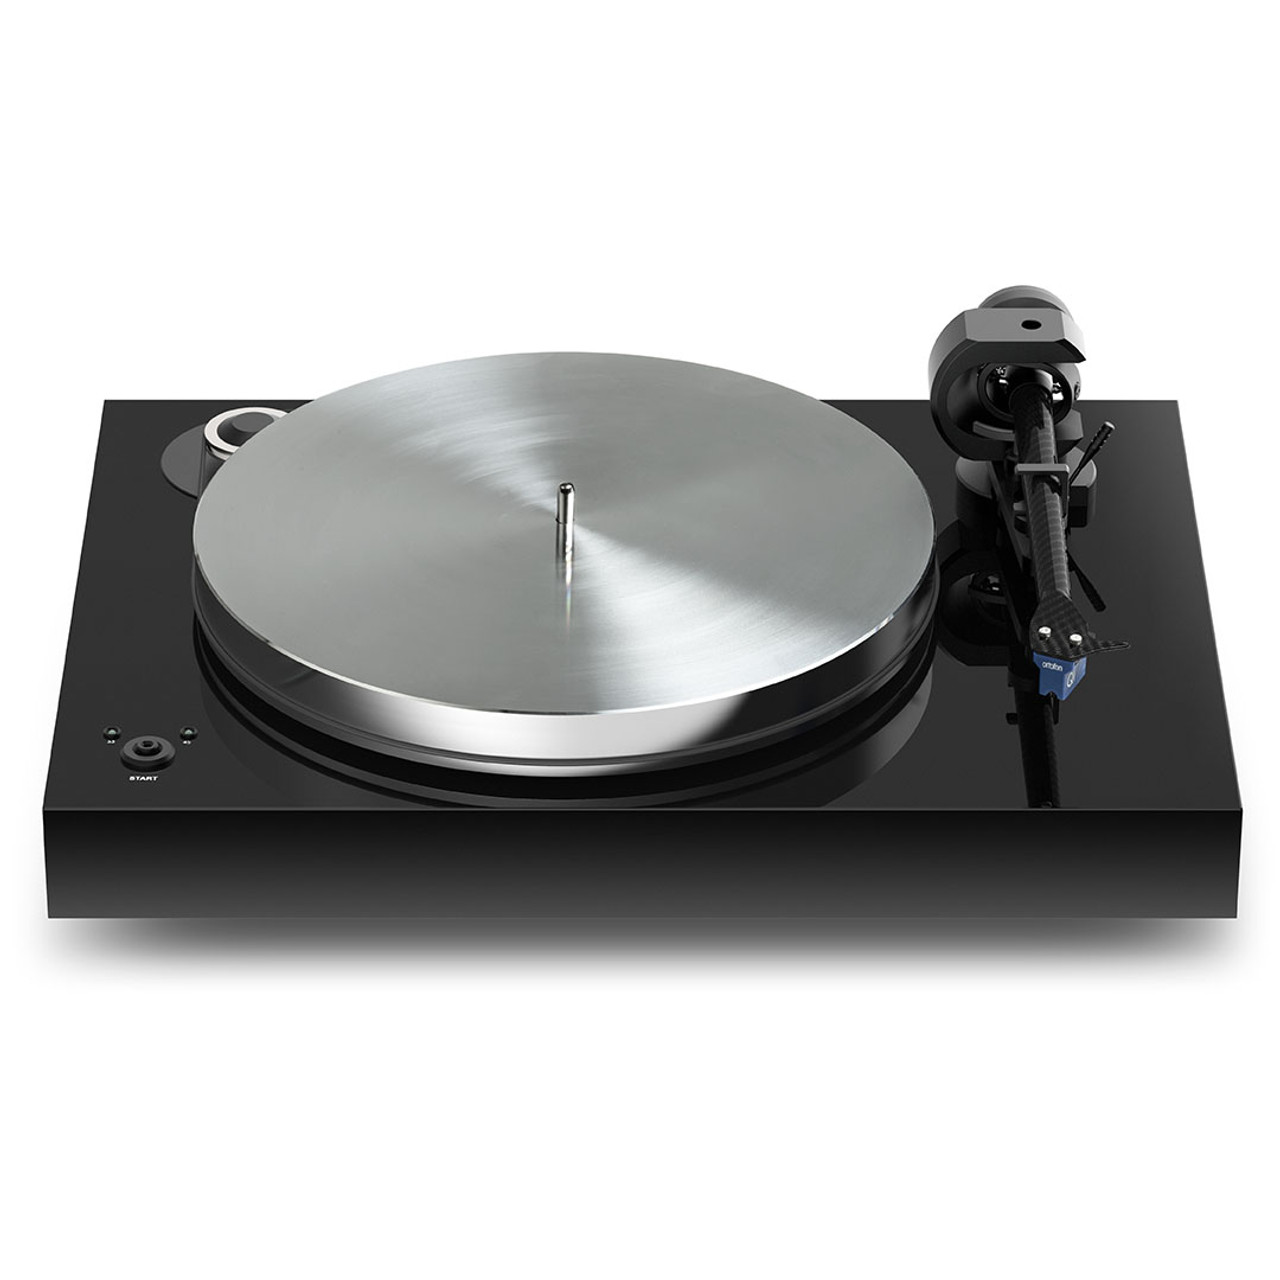 Pro-Ject Turntables - Pro-Ject Audio USA